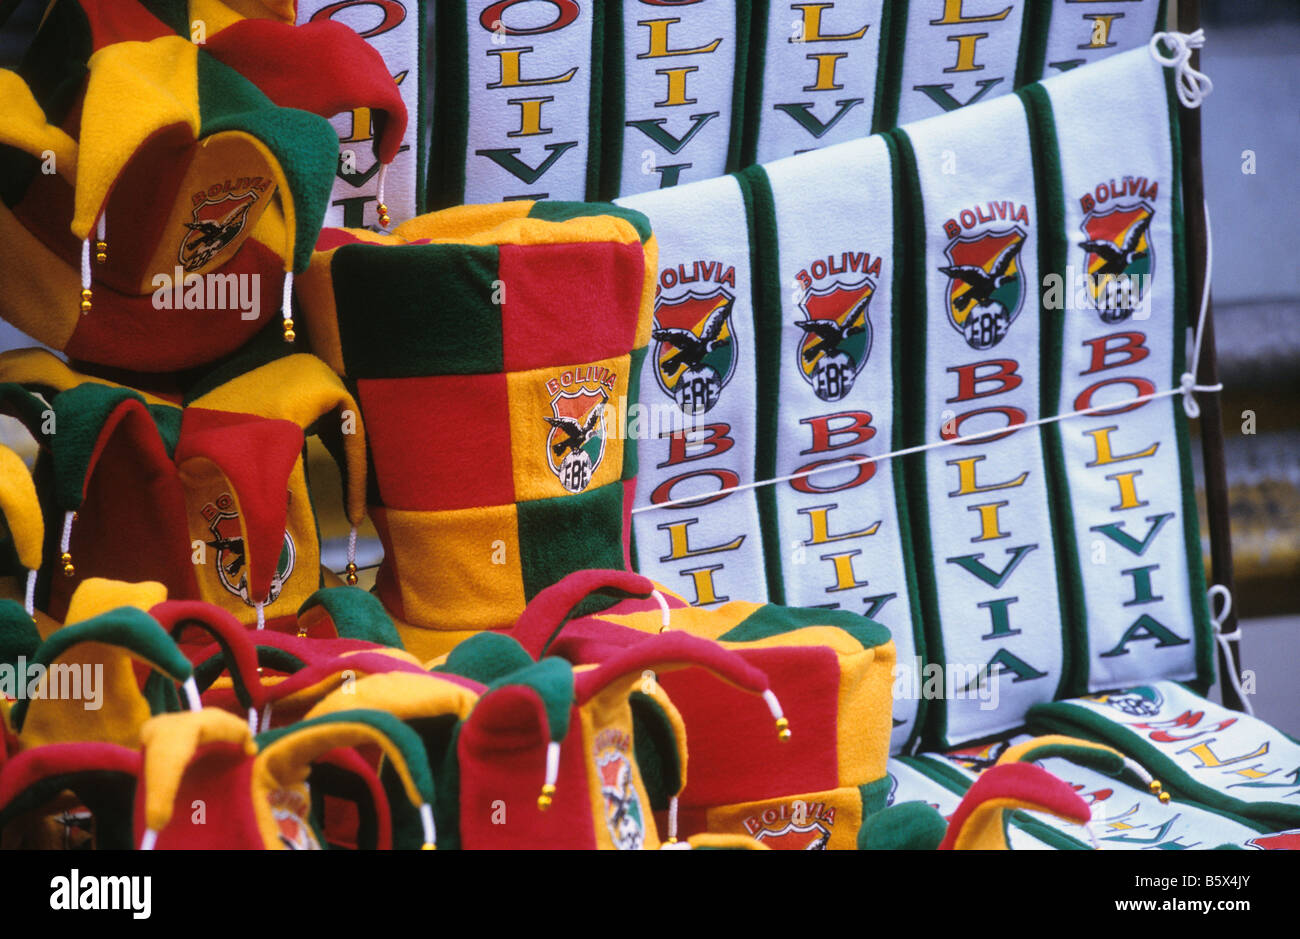 Bolivian national team hats and scarves on sale on stall before an international football match, La Paz, Bolivia Stock Photo